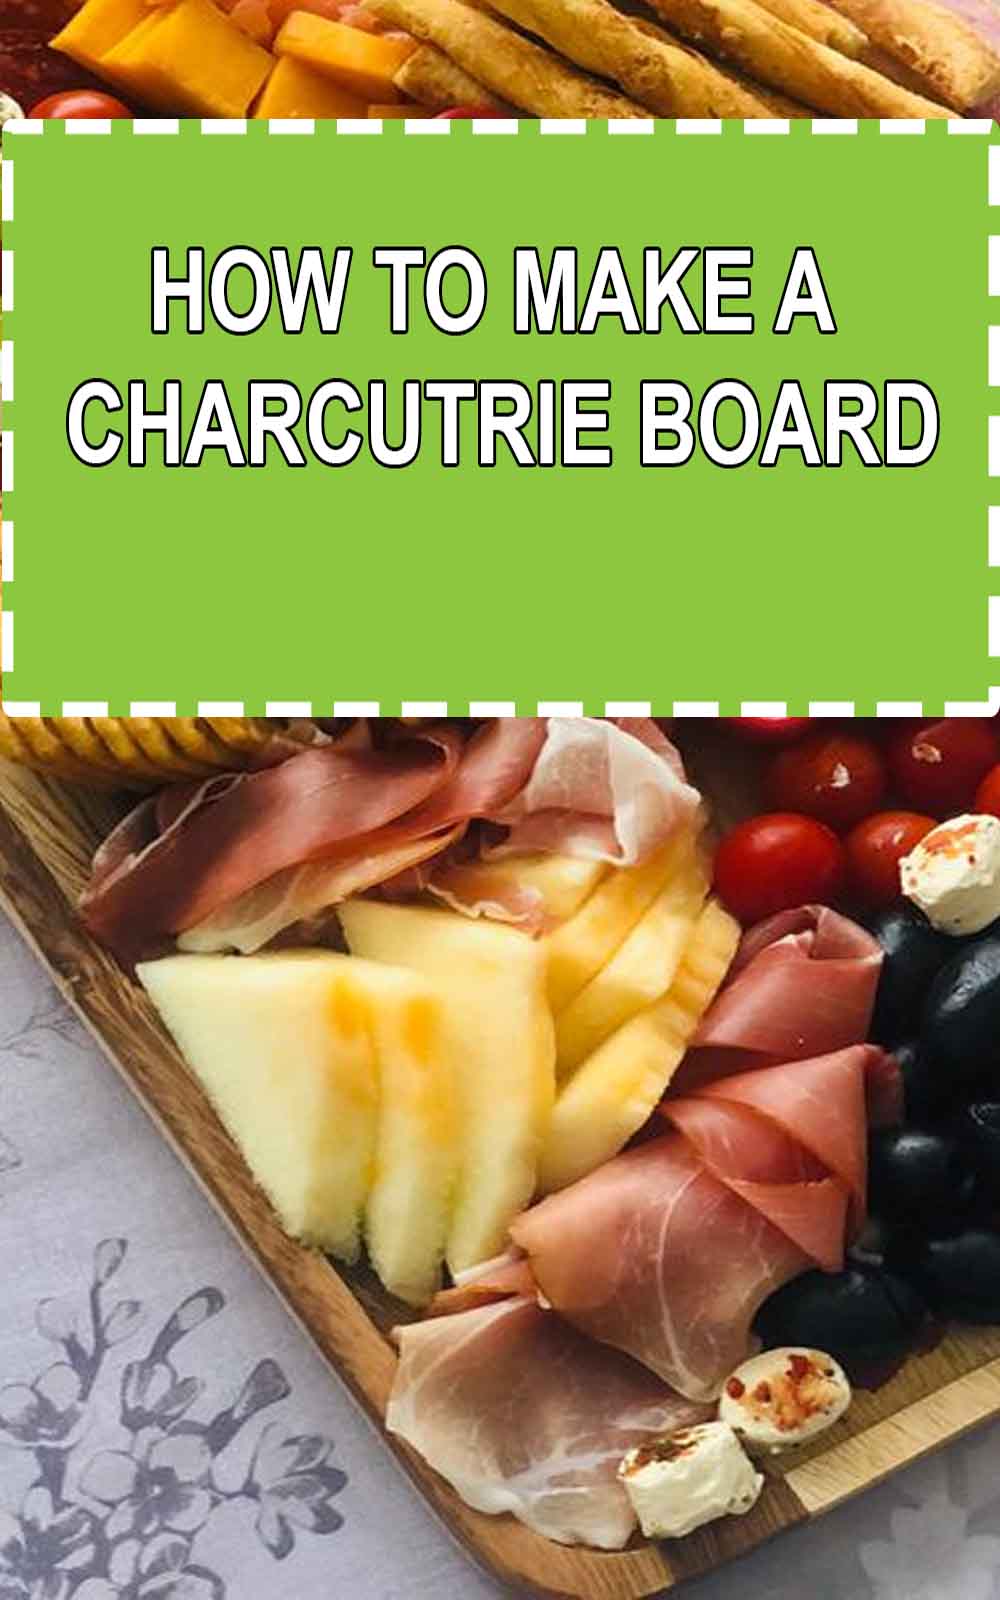 HOW TO MAKE A CHARCUTRIE BOARD